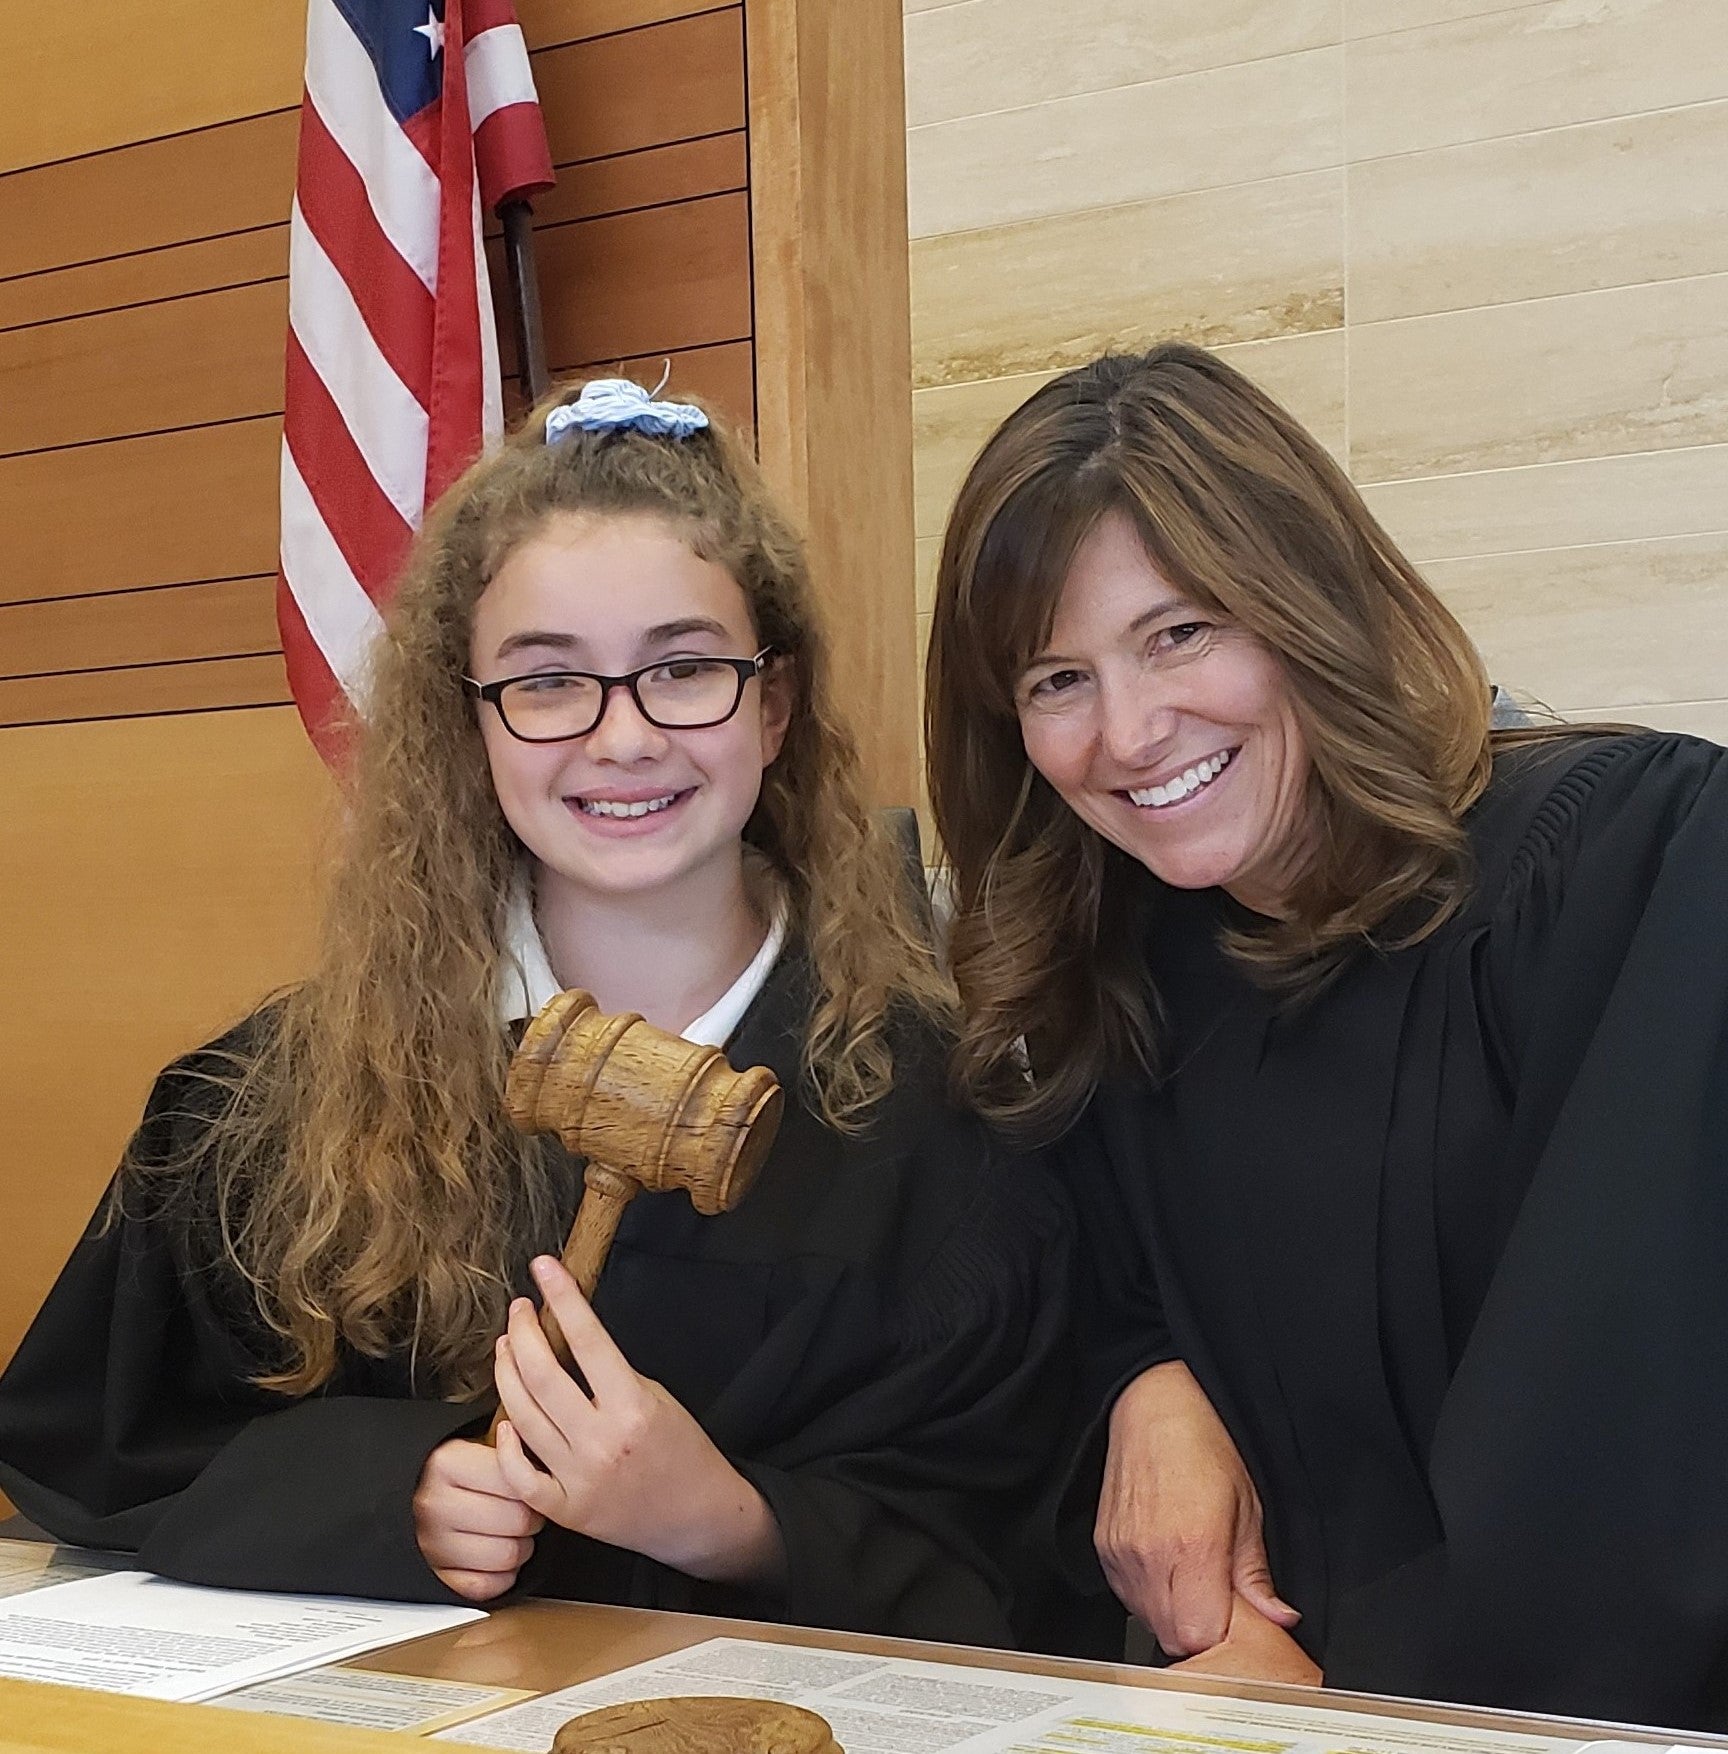 Judge Lucena on bench with young student holding gavel